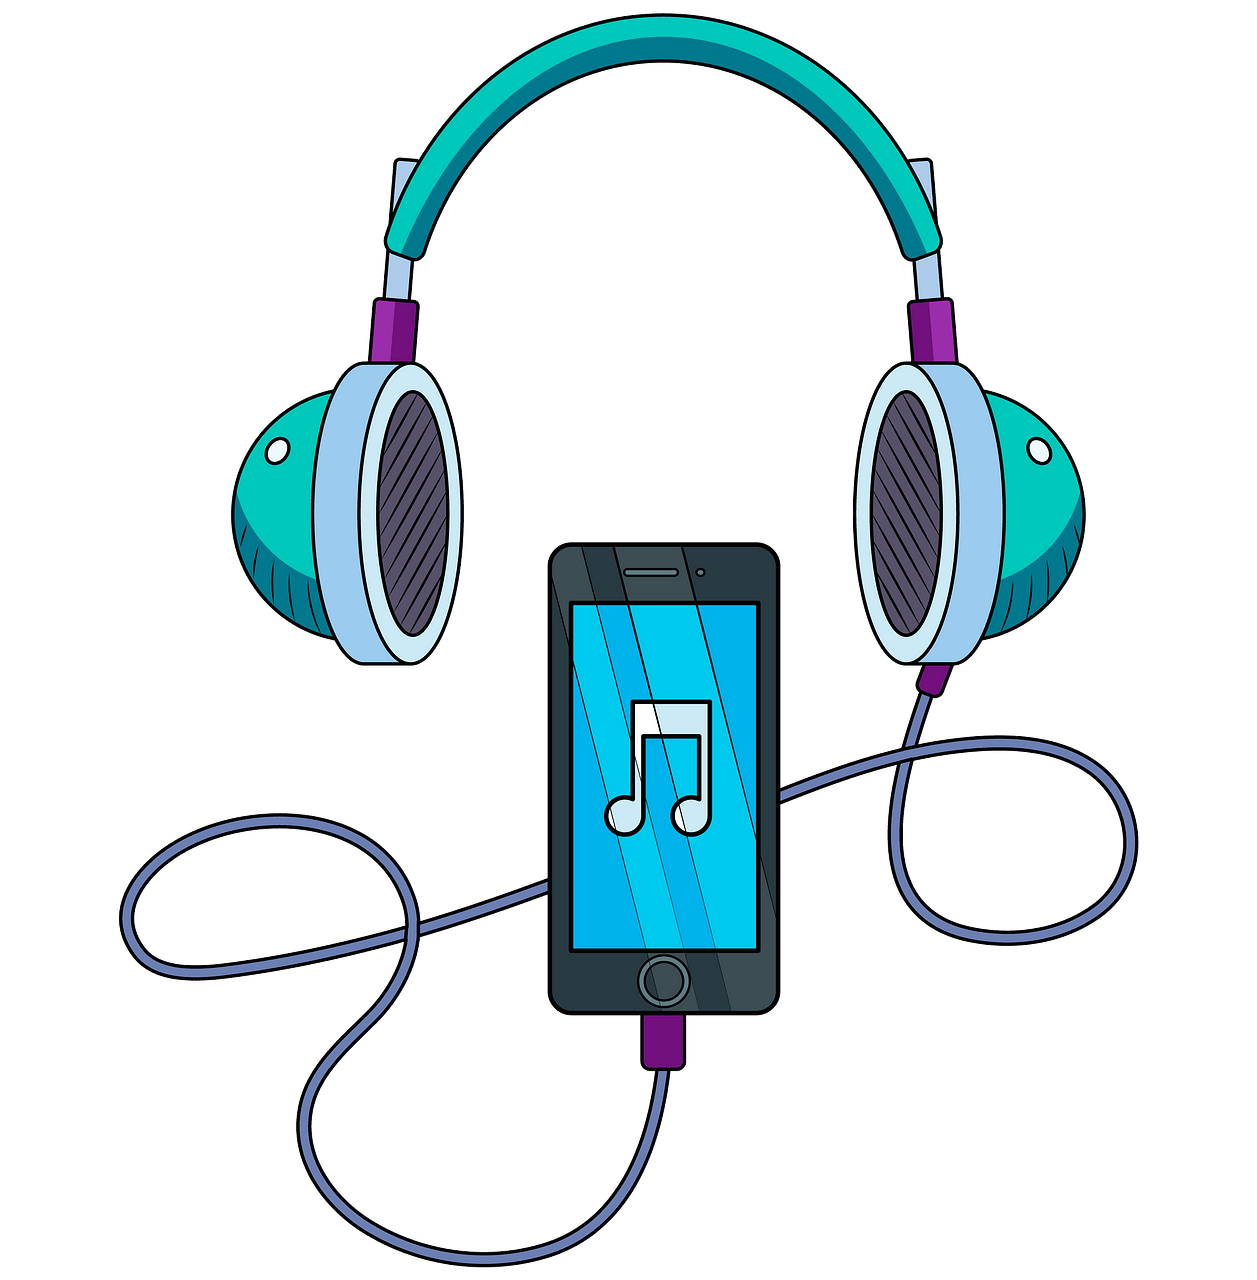 Music player and headphones clipart